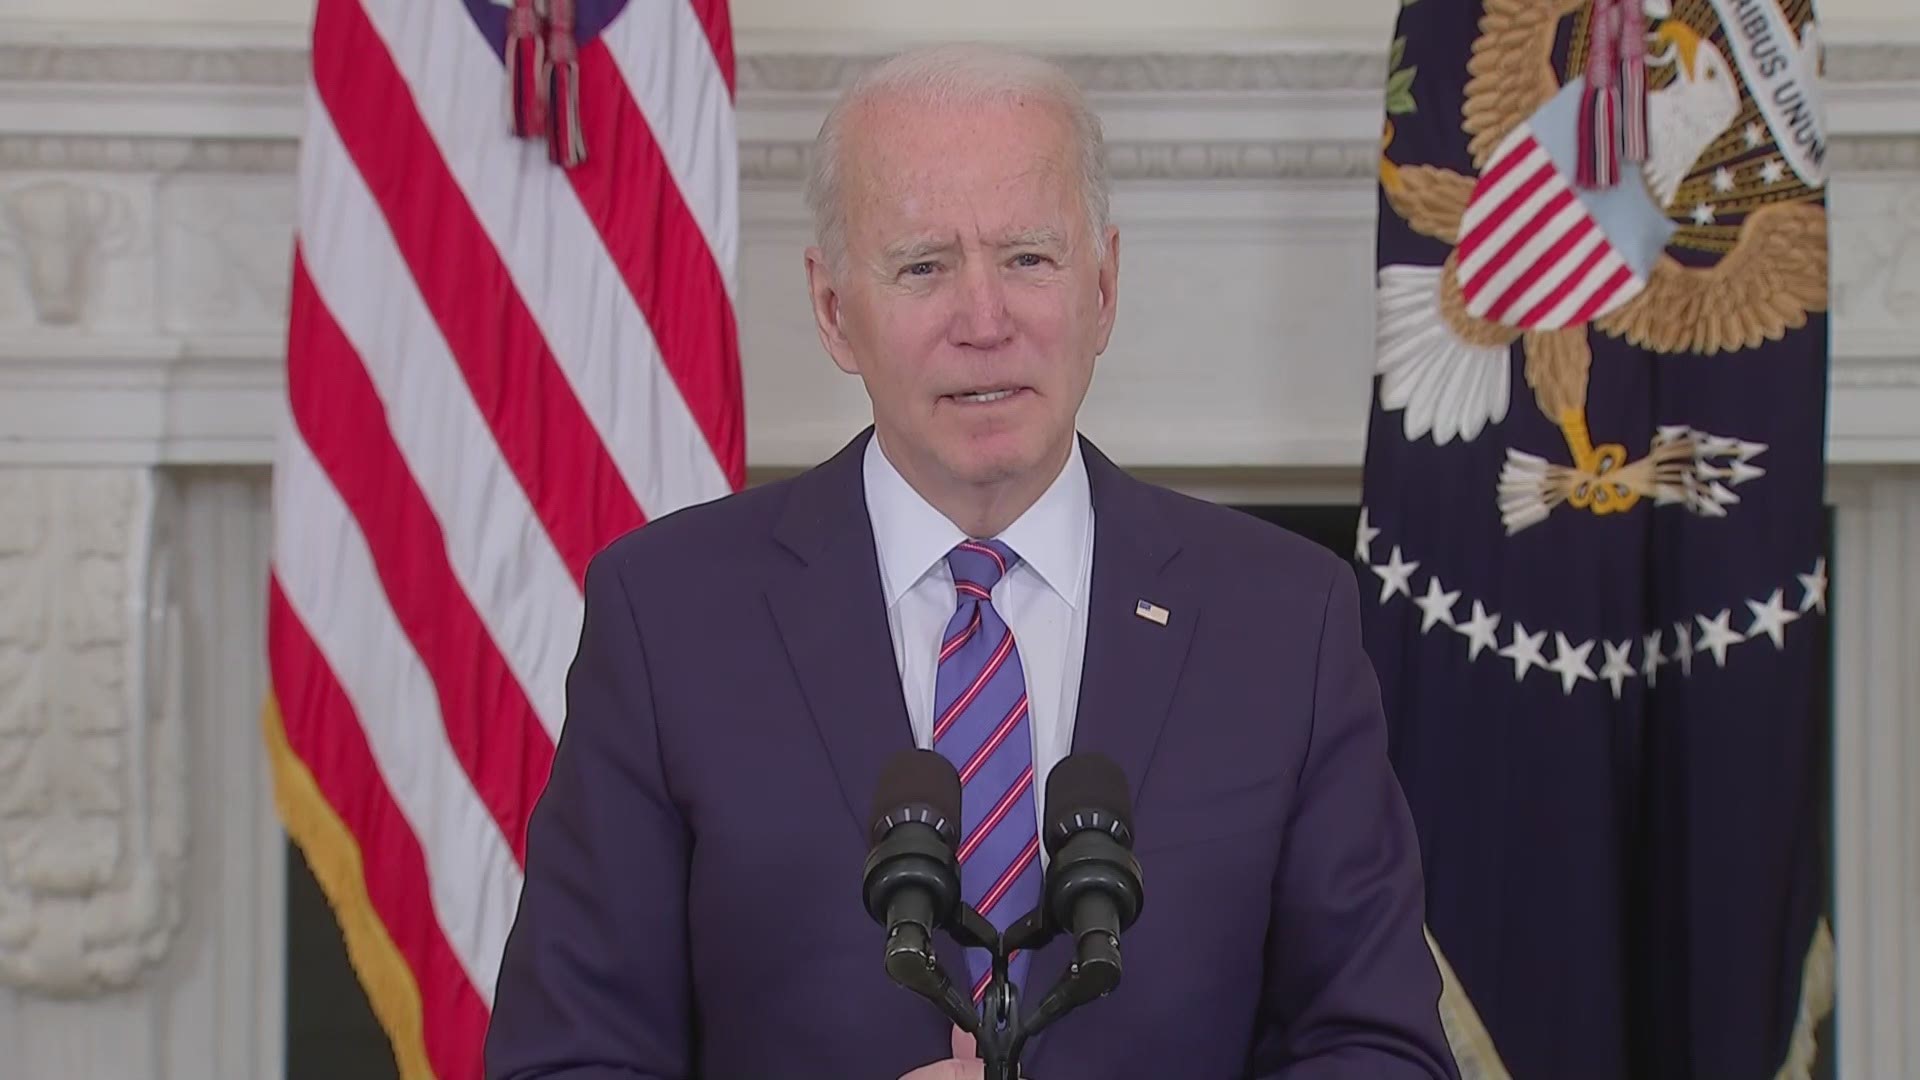 President Joe Biden released a statement from the White House after eight people were shot and killed at an Indianapolis FedEx facility Thursday, April 15, 2021.